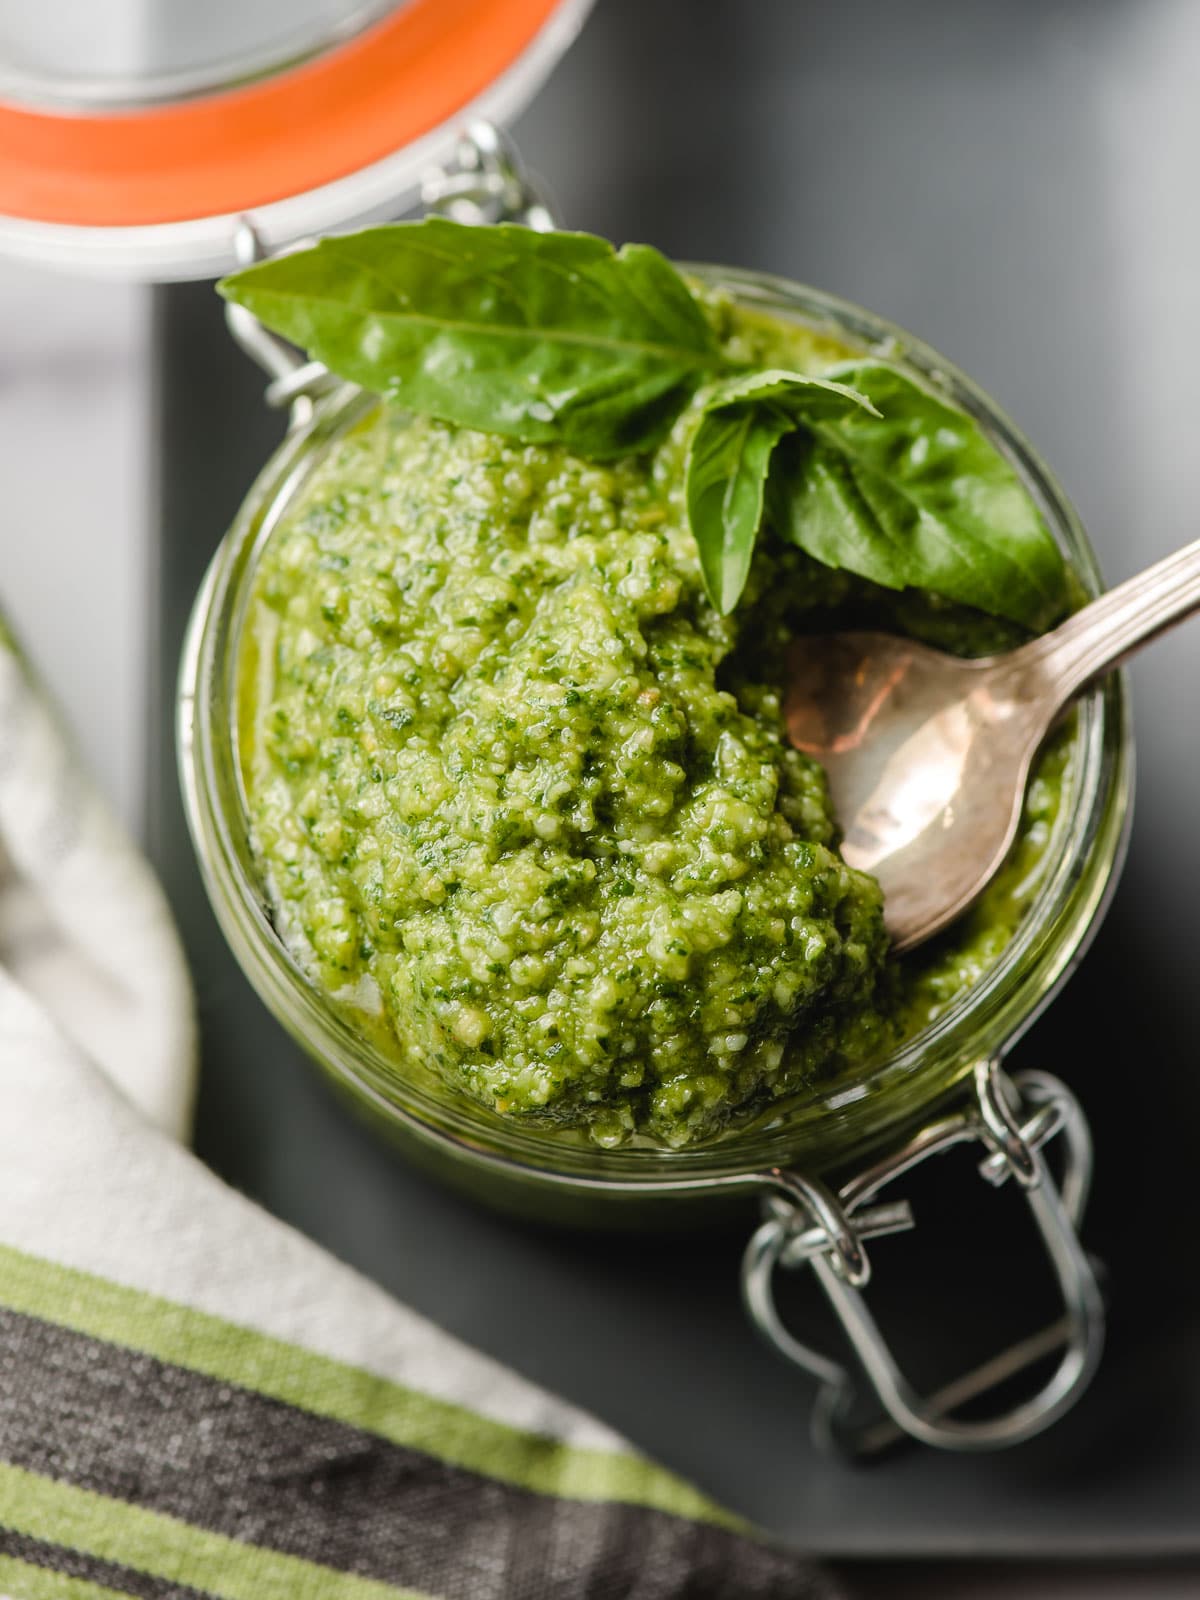 Jar of pesto with an antiqued spoon removing a spoonful.